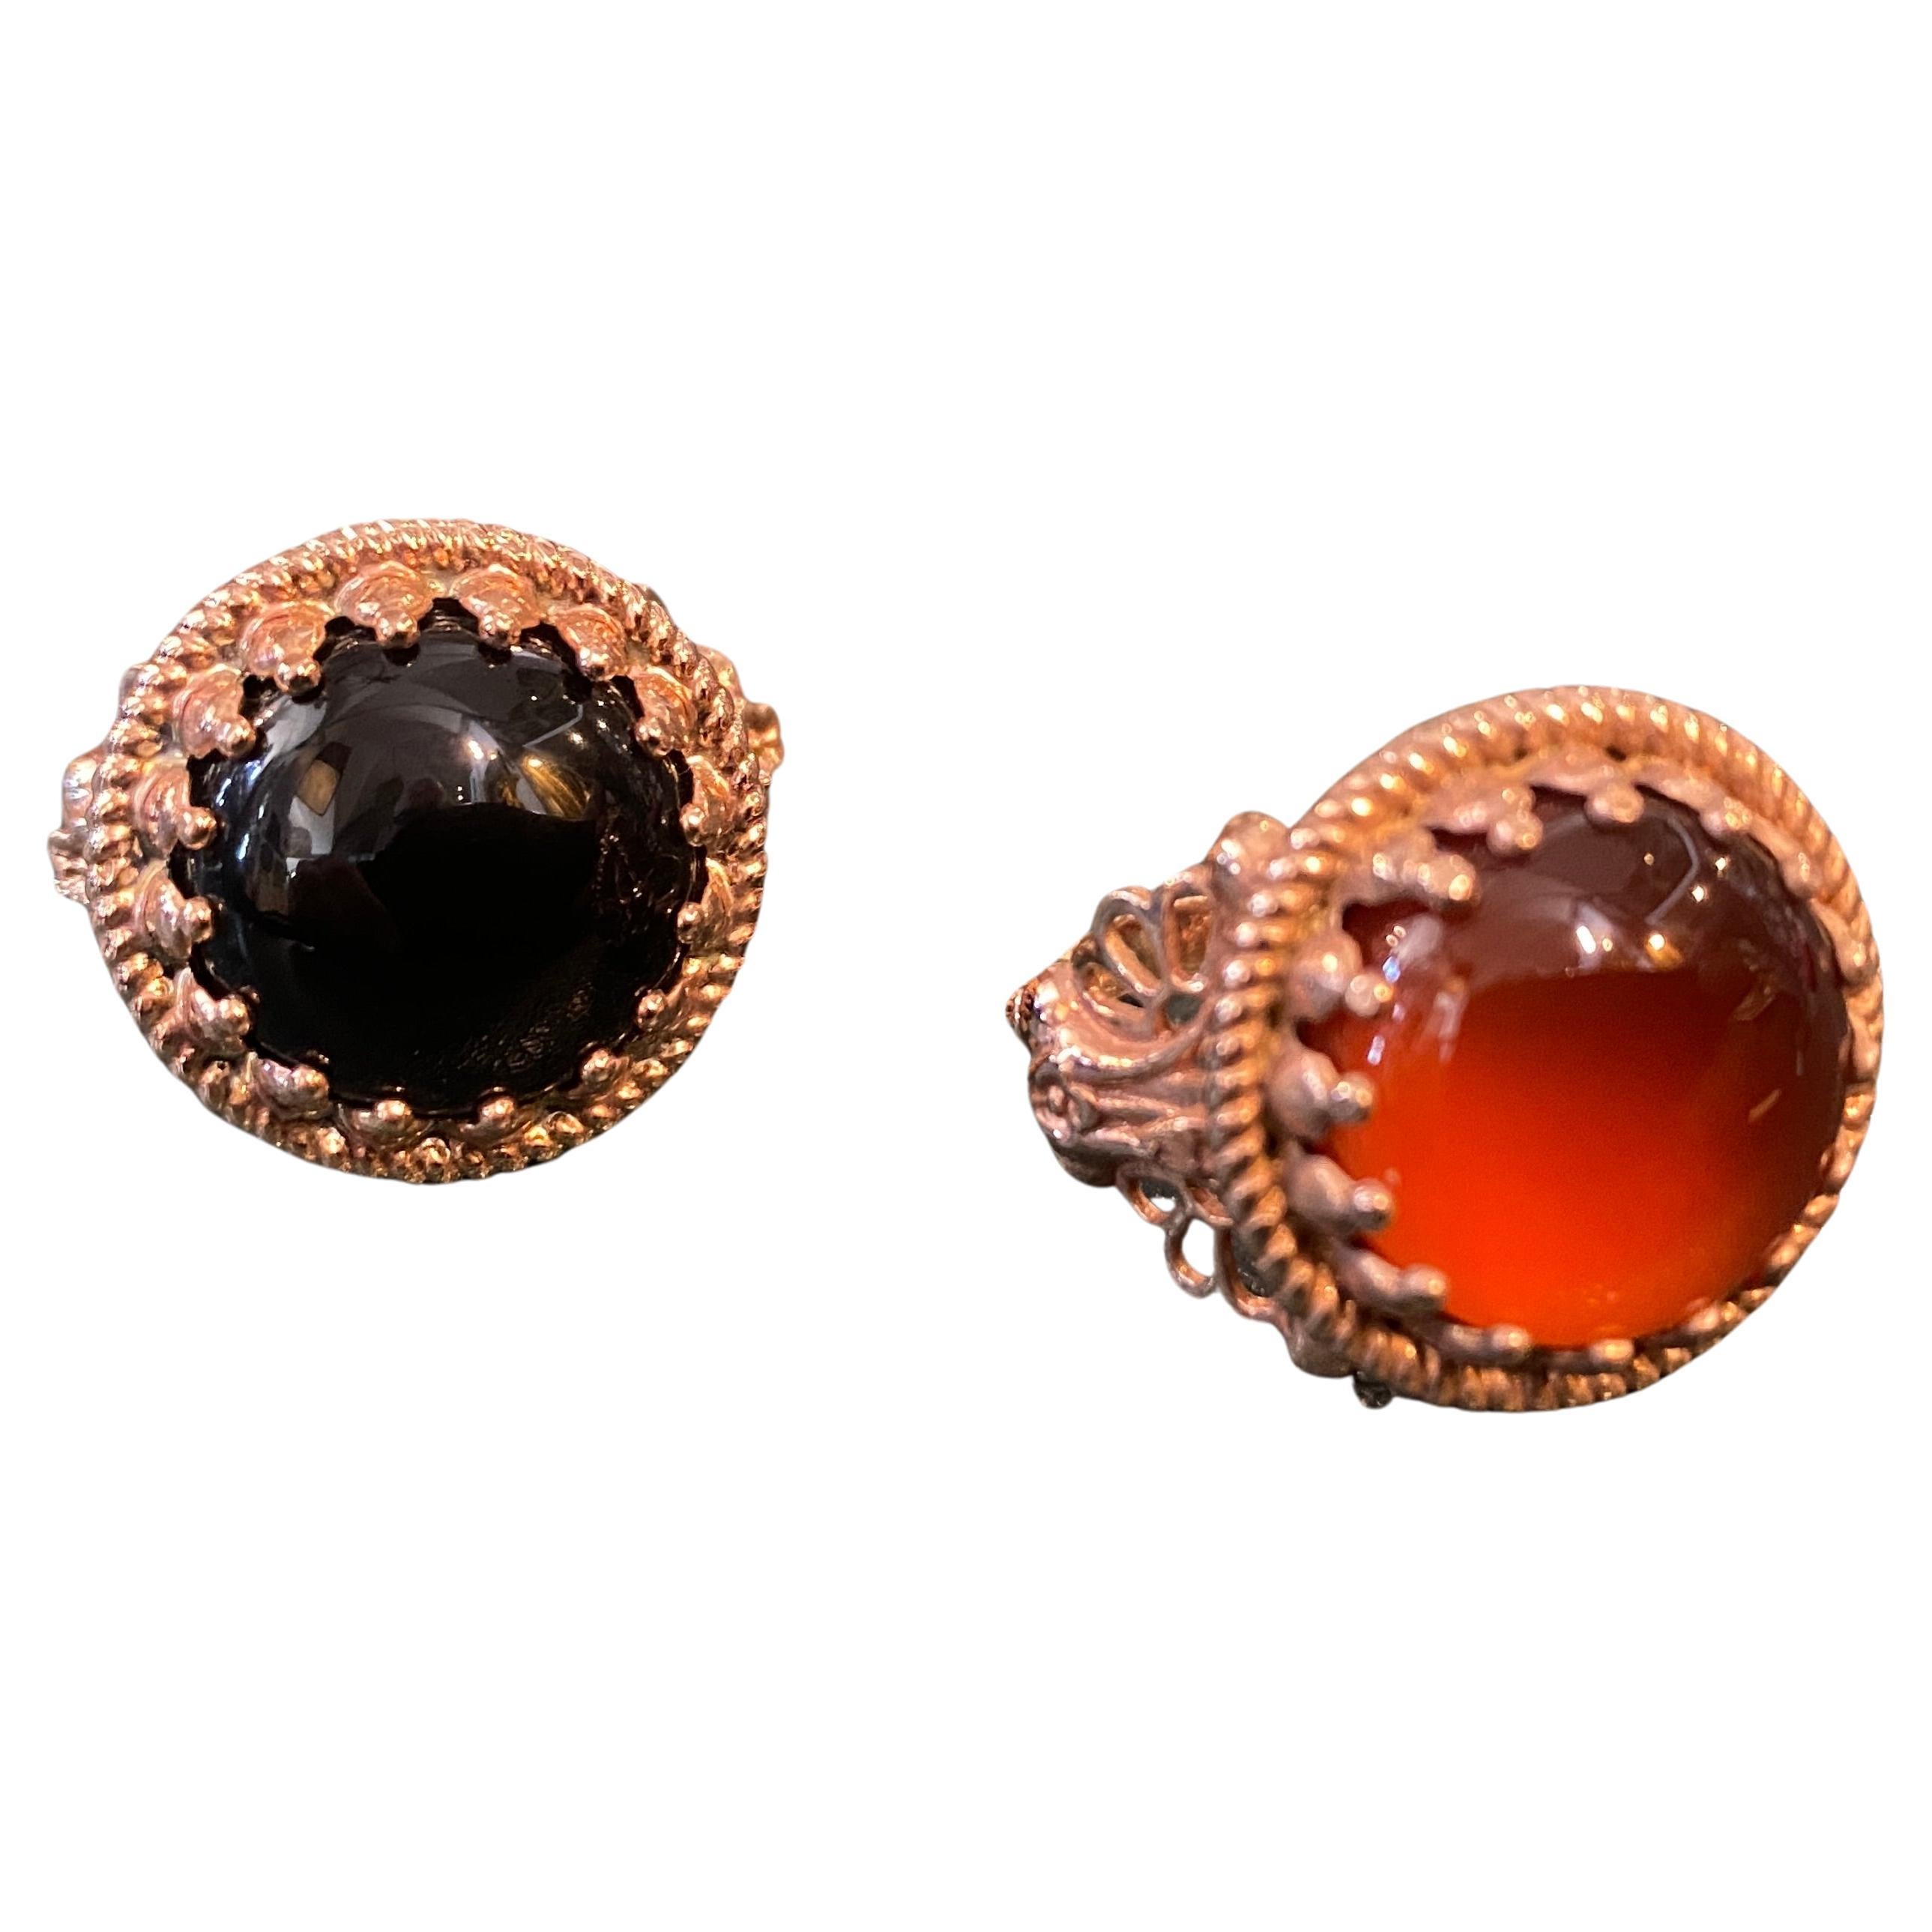 Two cocktail rings designed and manufactured in Italy by Anomis, they are in Bronze, one with Onyx  round cabochon, the other one it's with a round carnelian. they arenunique pieces of jewelry that showcase the natural beauty of onyx and carnelian